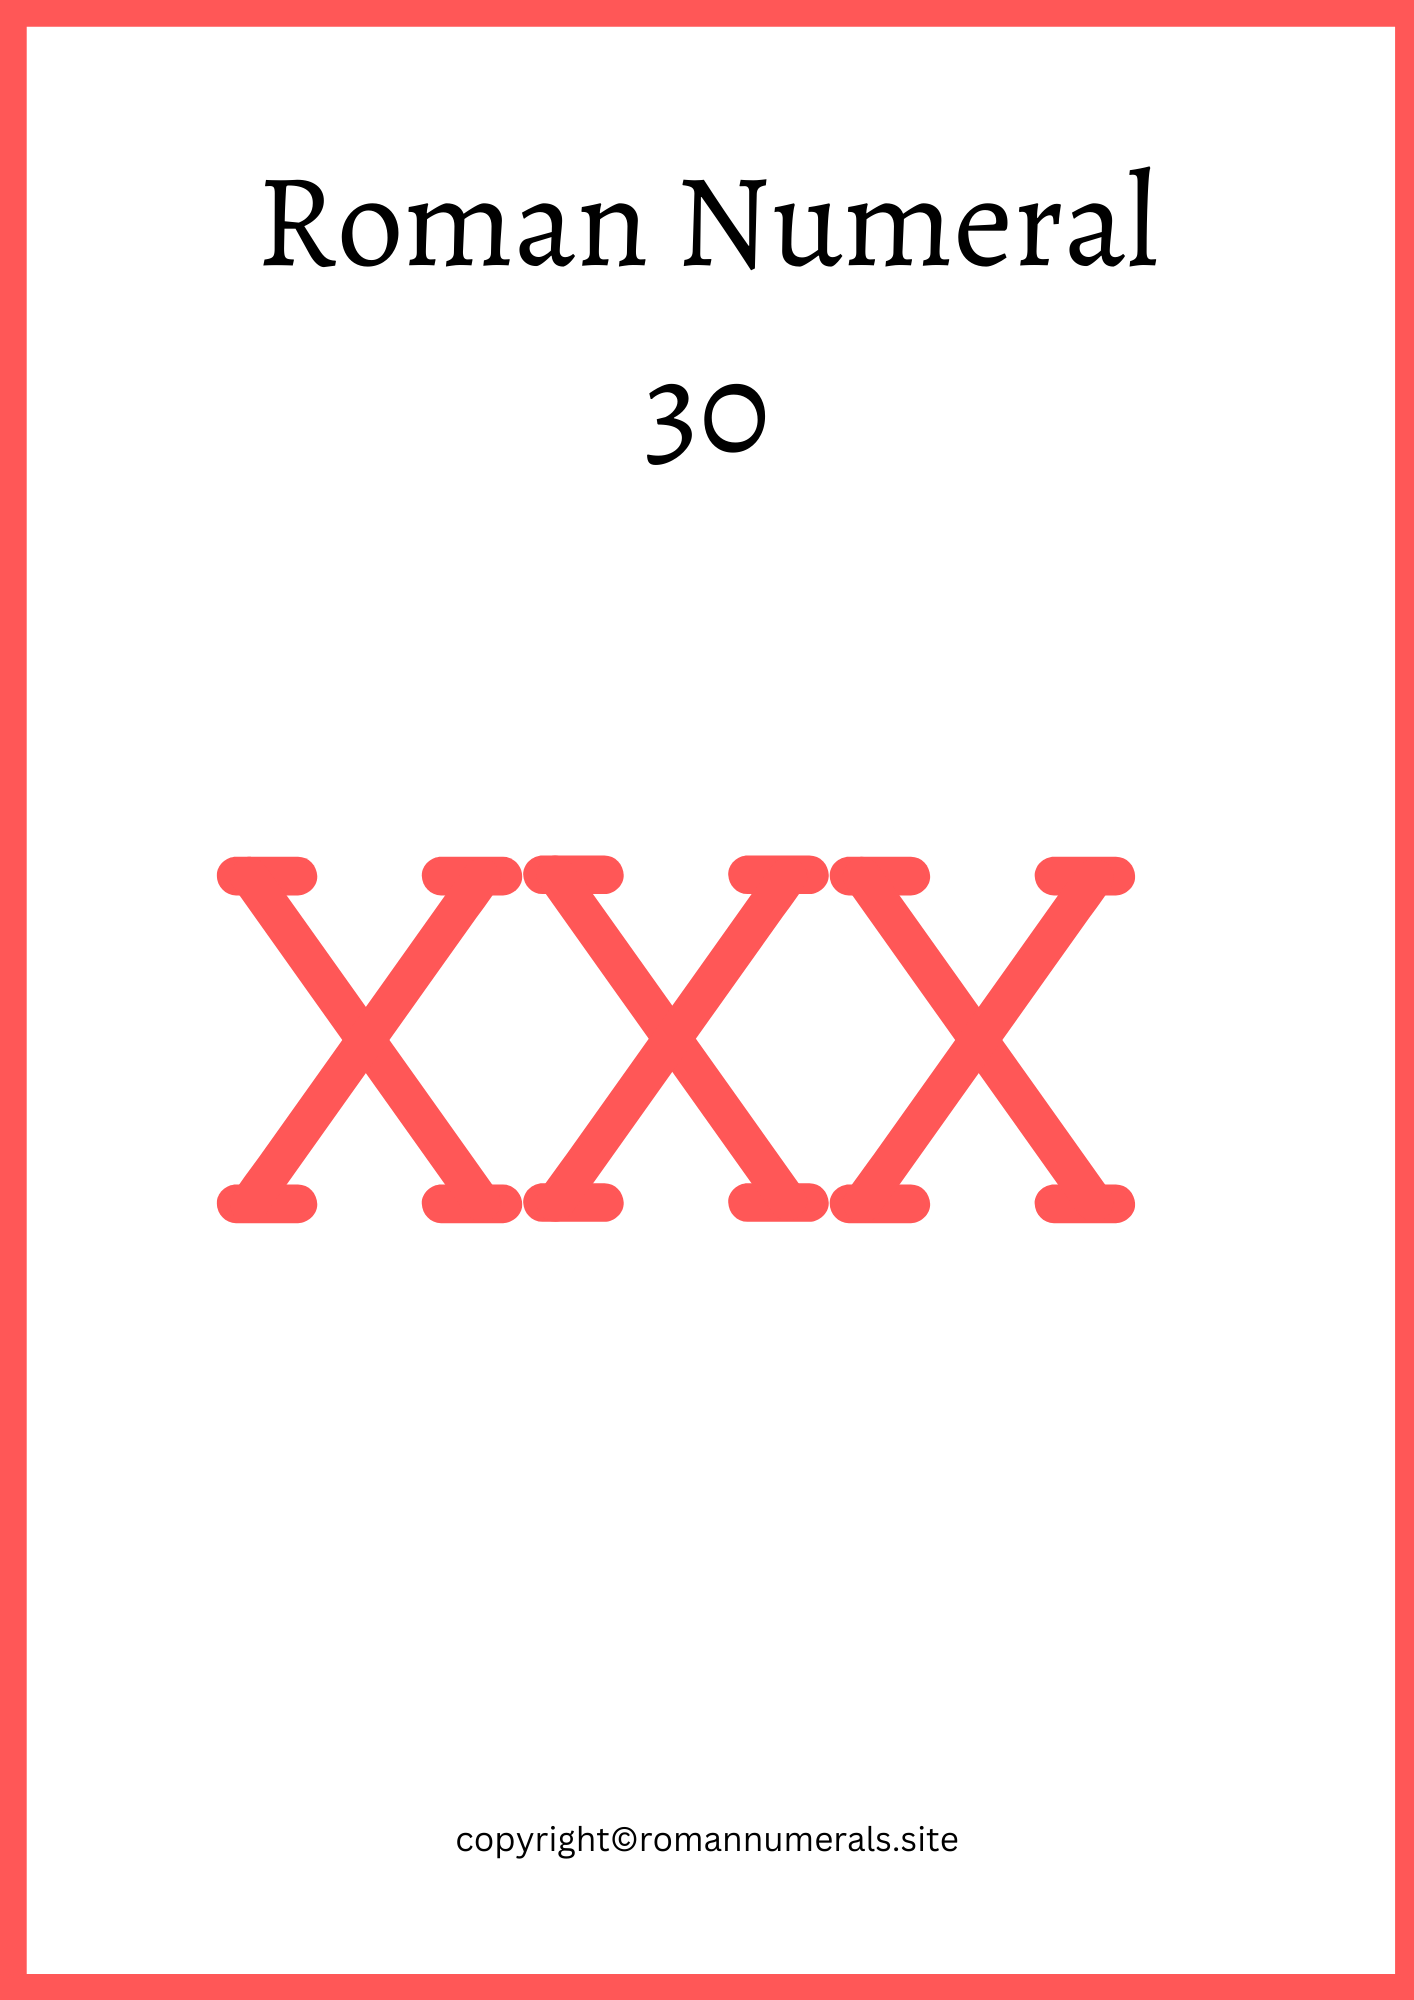 how to write 30 in roman numerals